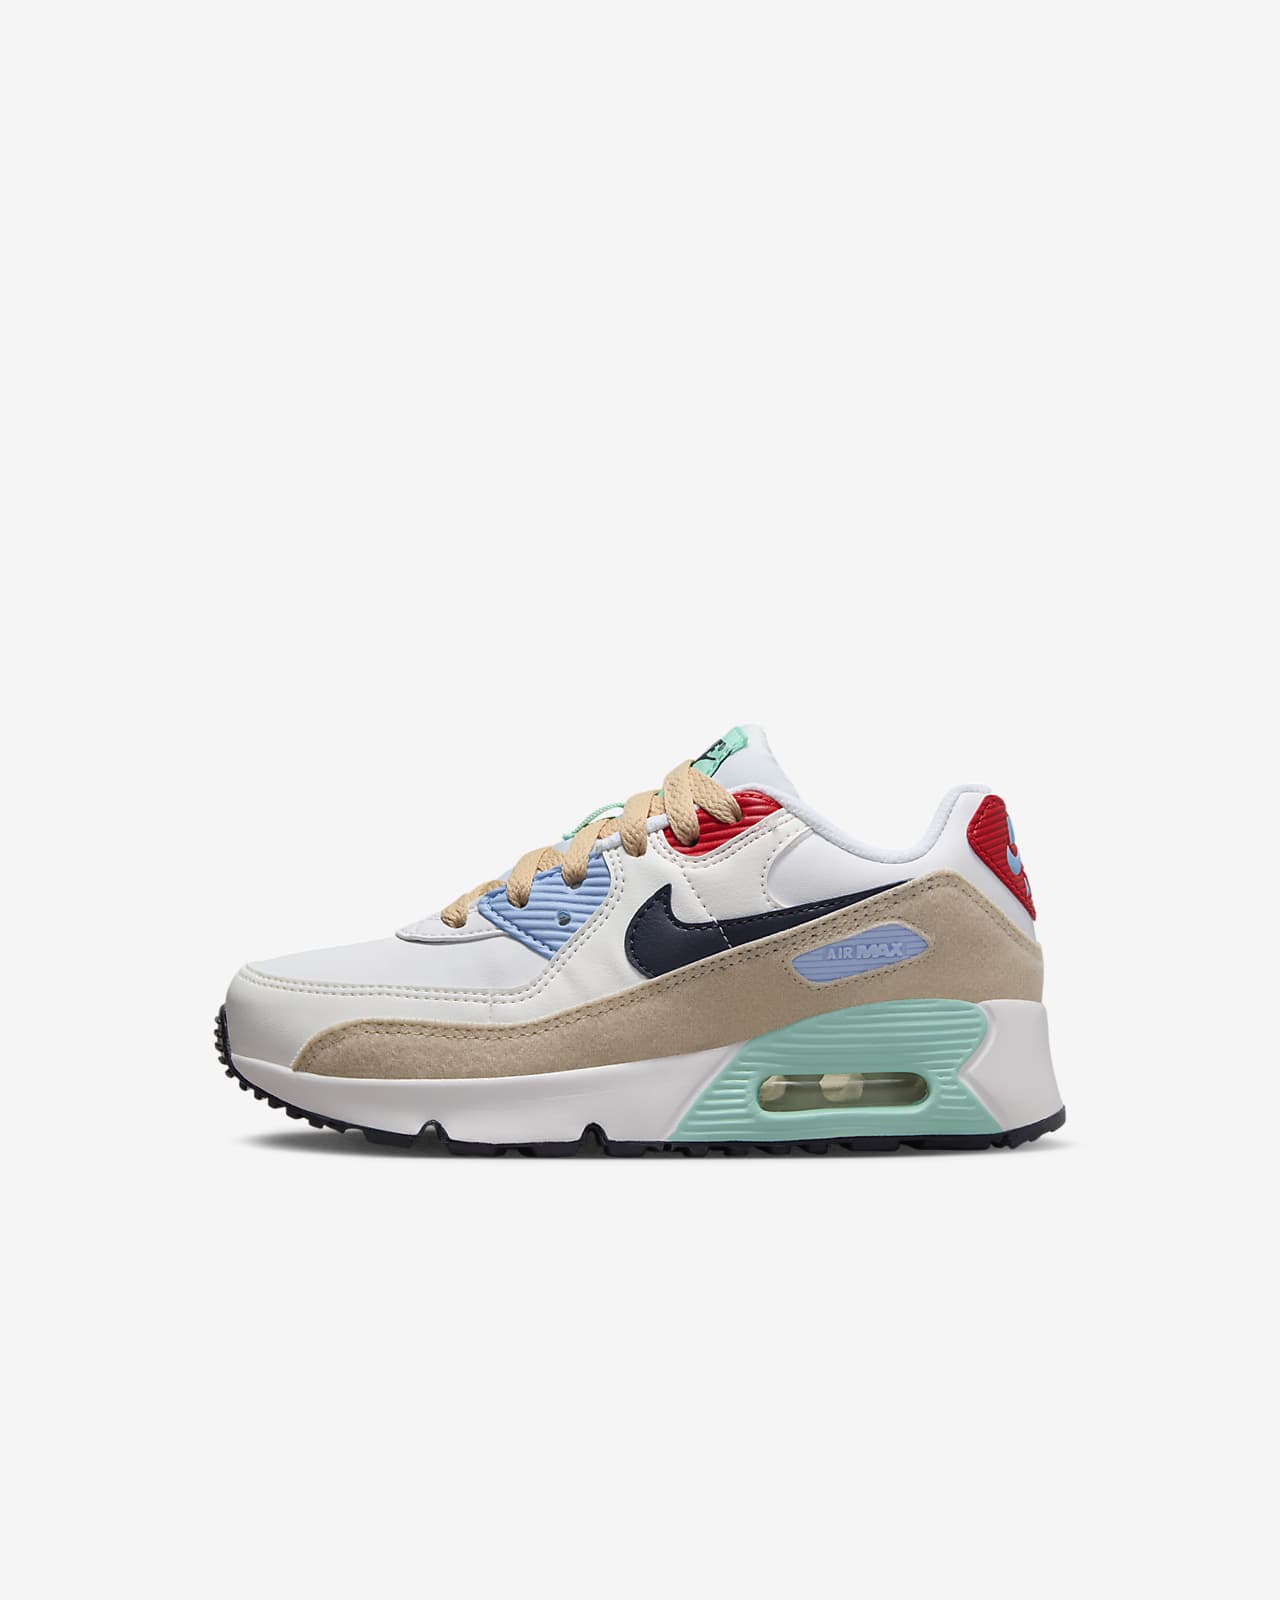 Air Max 90 LTR Men's Shoes. Nike ID